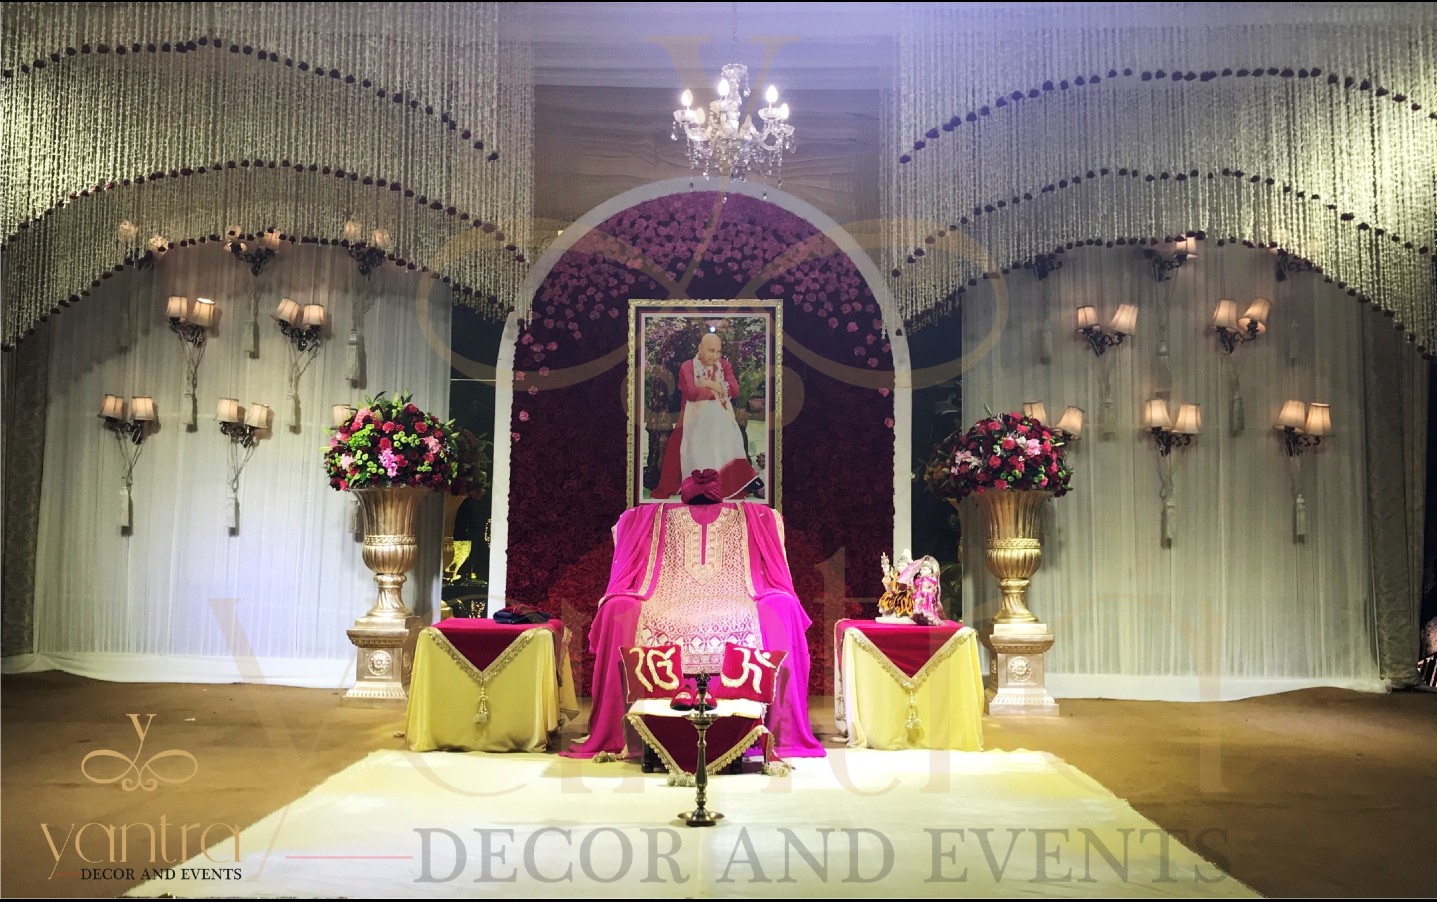 cyantra-decor-events-religious-image-stage